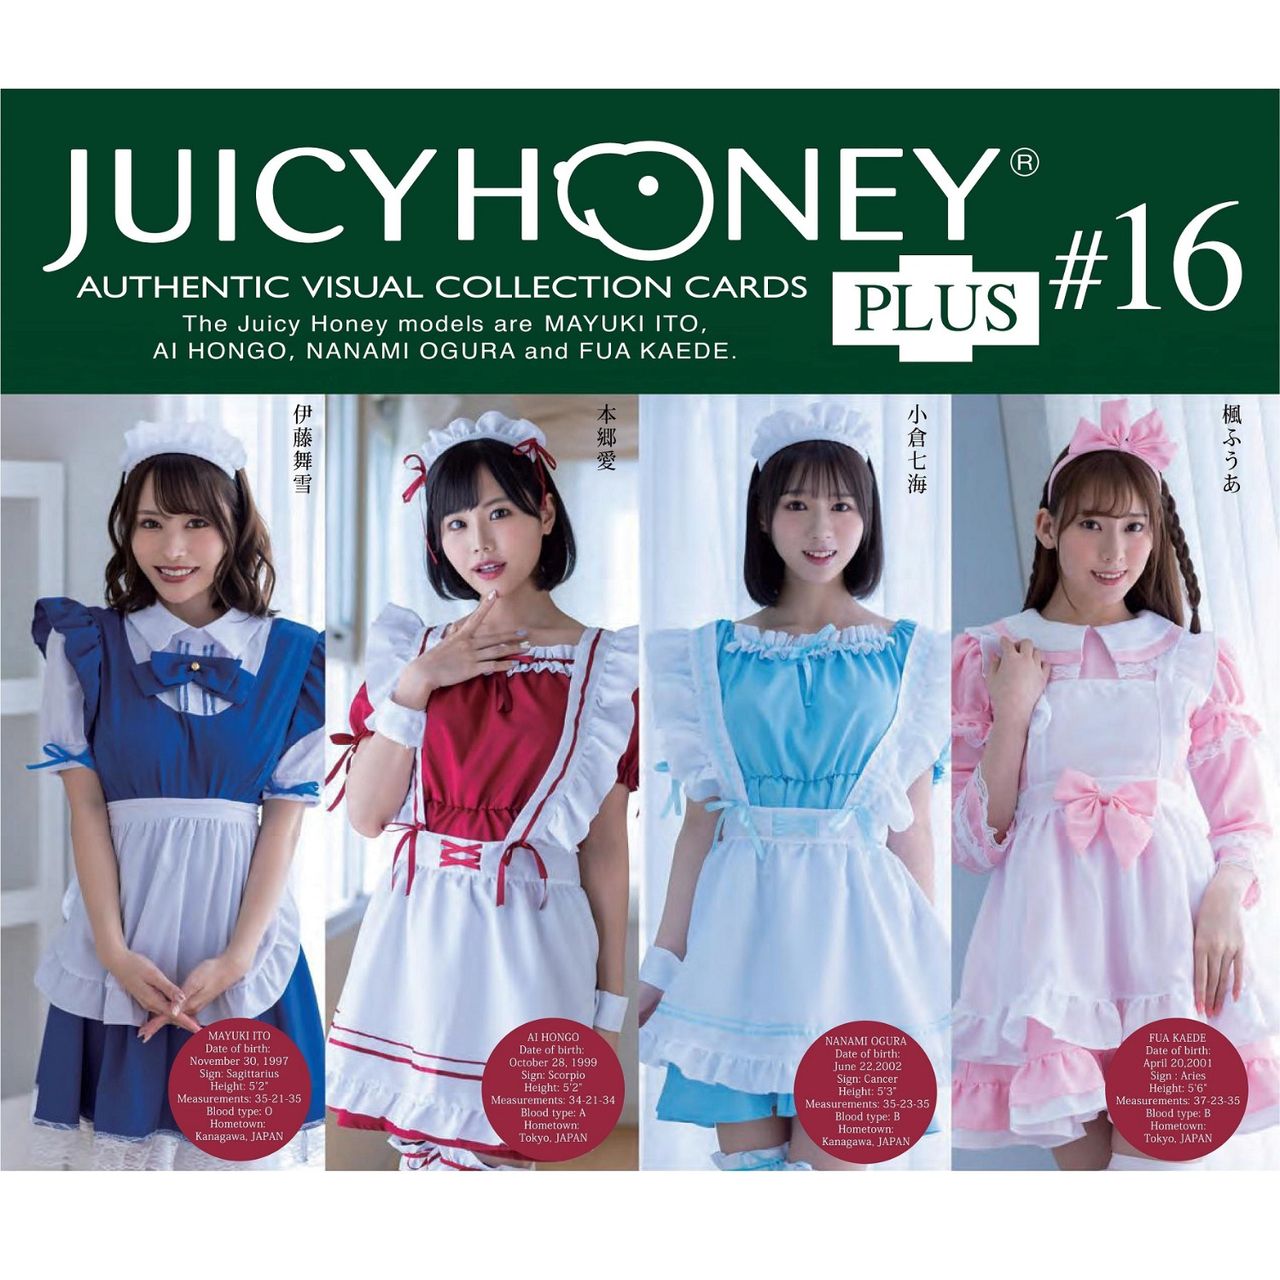 Juicy Honey Collection Cards PLUS #16 (sealed box) | Listing details